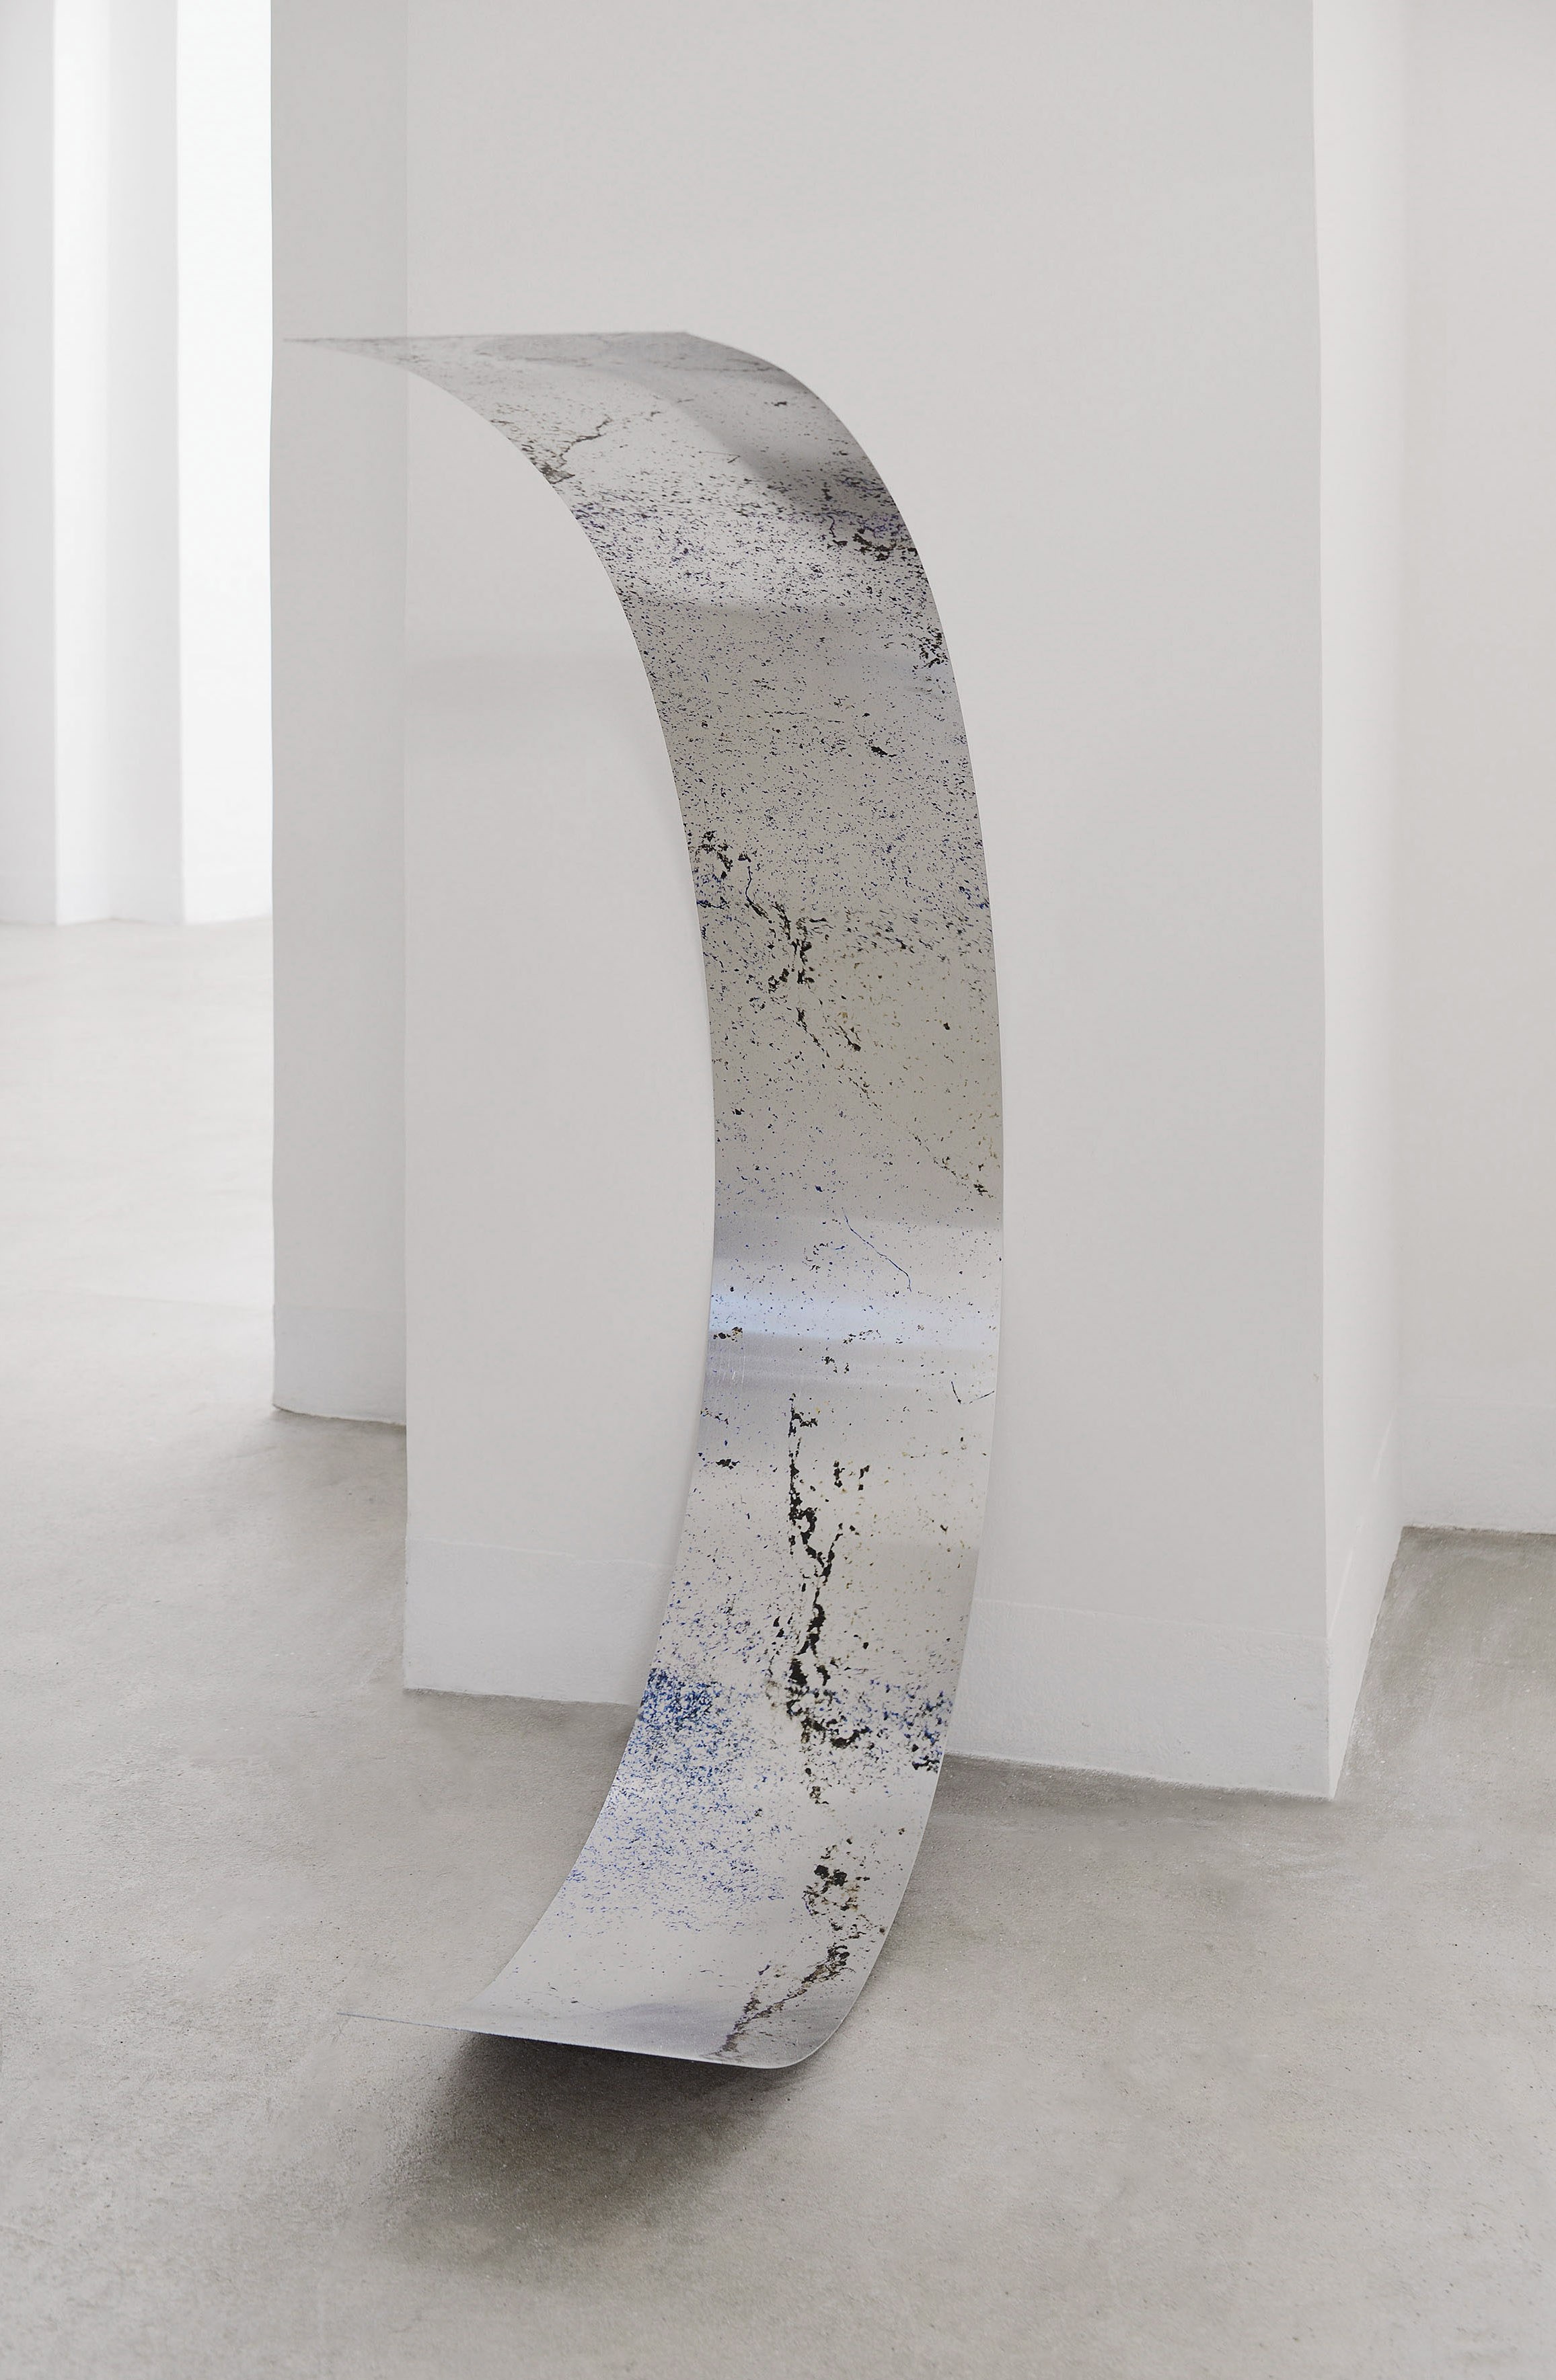 Chen Xiaoyi, Spoken Leaves, 2024, exhibition view, Matèria, Roma. Courtesy the artist and Matèria, Roma